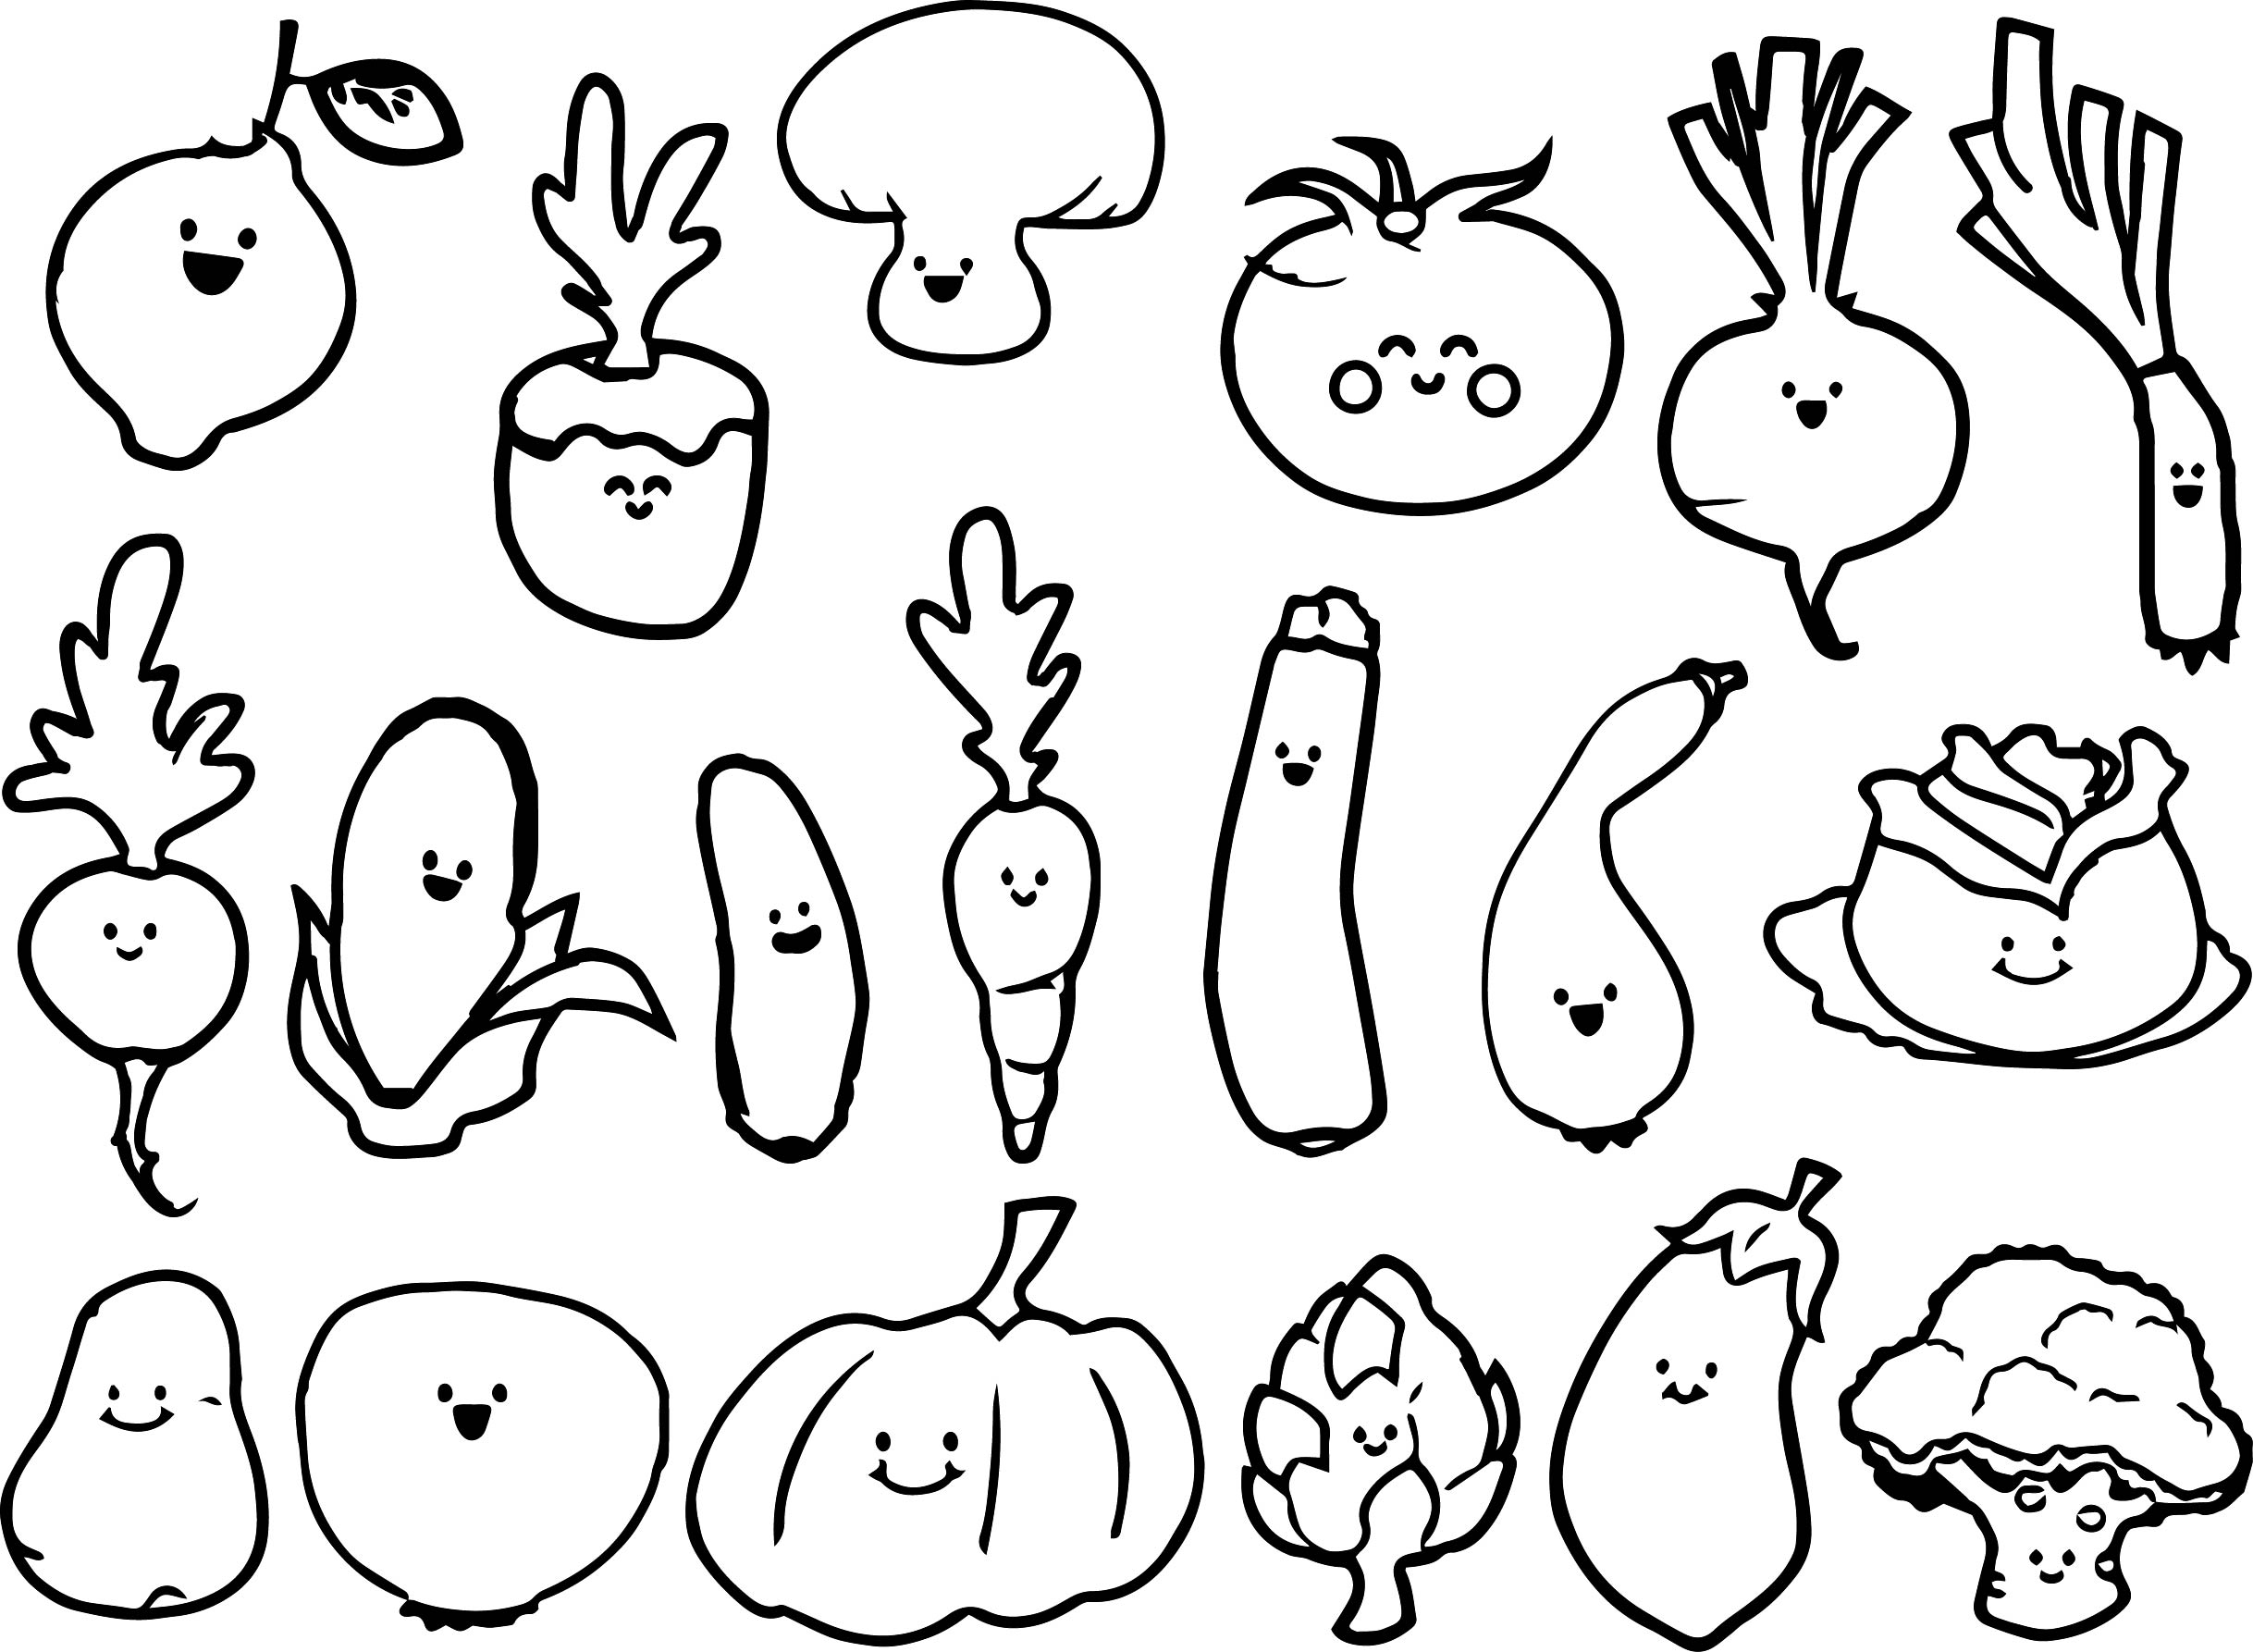 Fruit Coloring Pages at GetDrawings | Free download